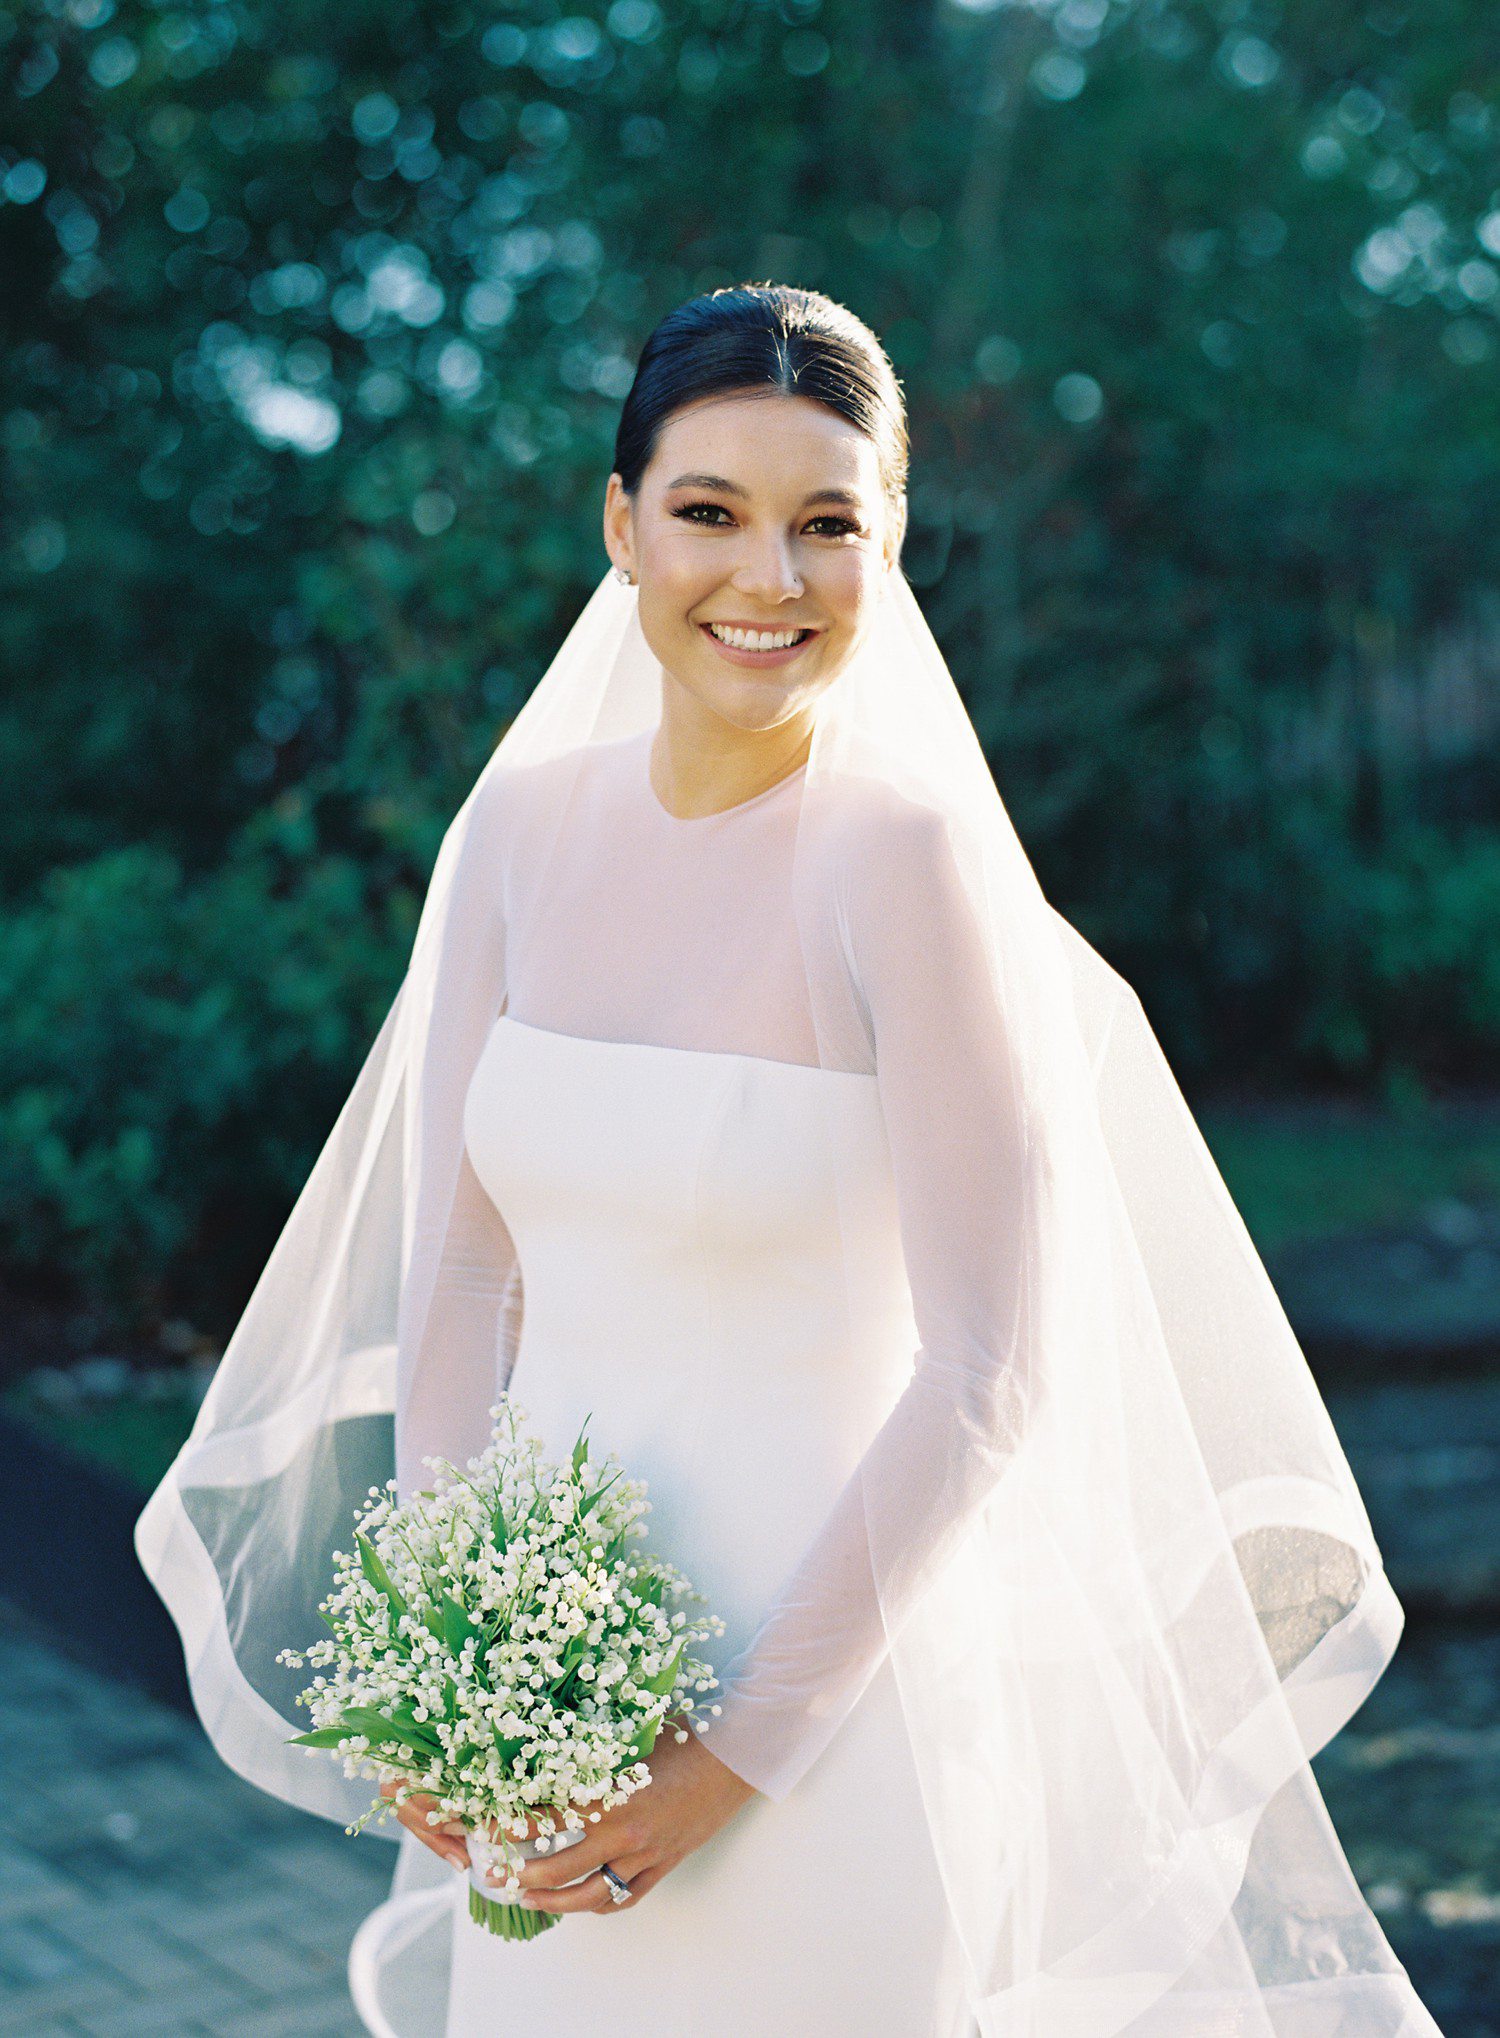 Bridal portraits in Houston with veil and bouquet of baby's breath.